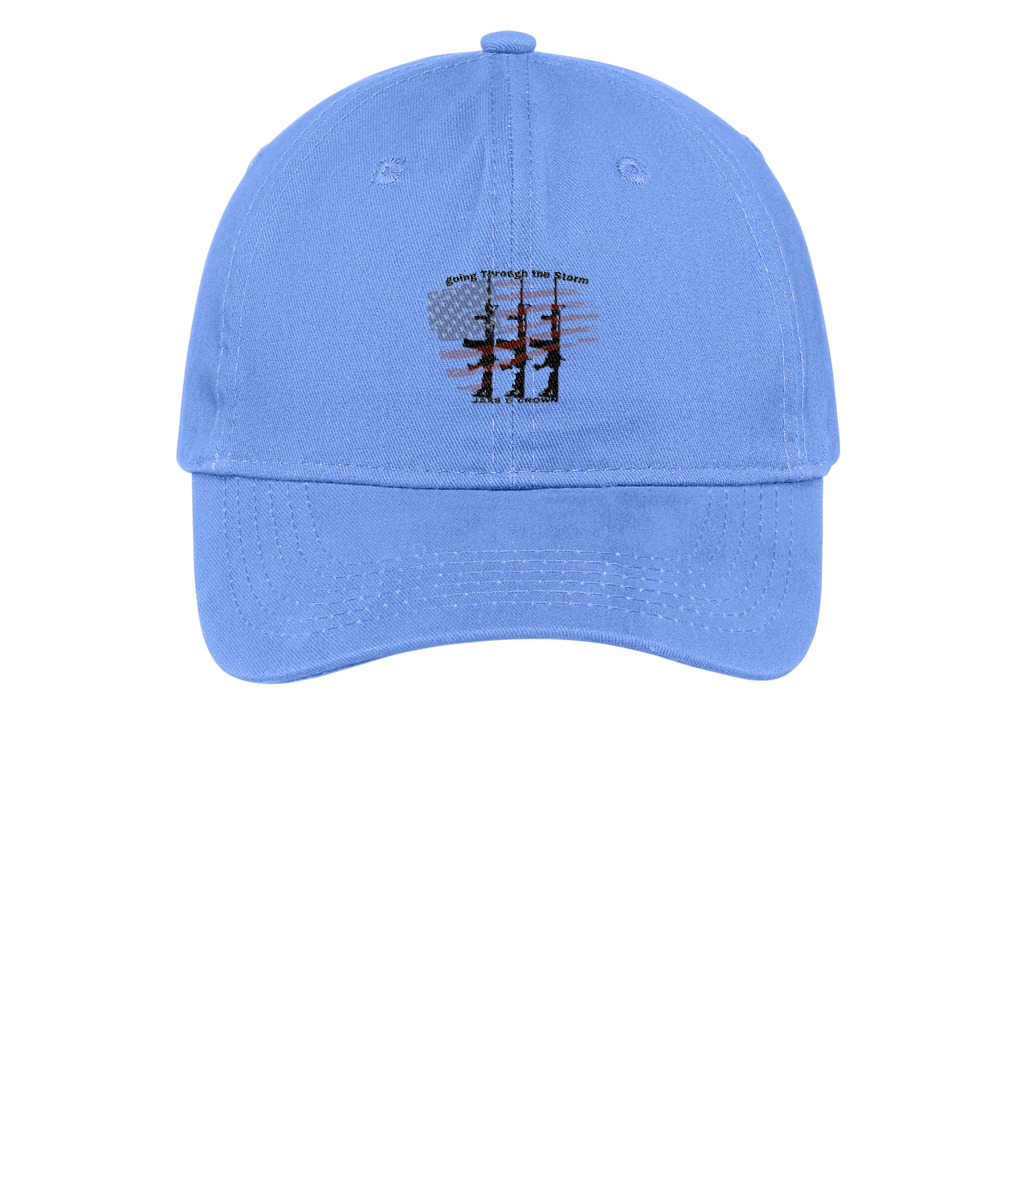 Jaxs & crown gtts Embroidered Brushed Twill Cap or Similar